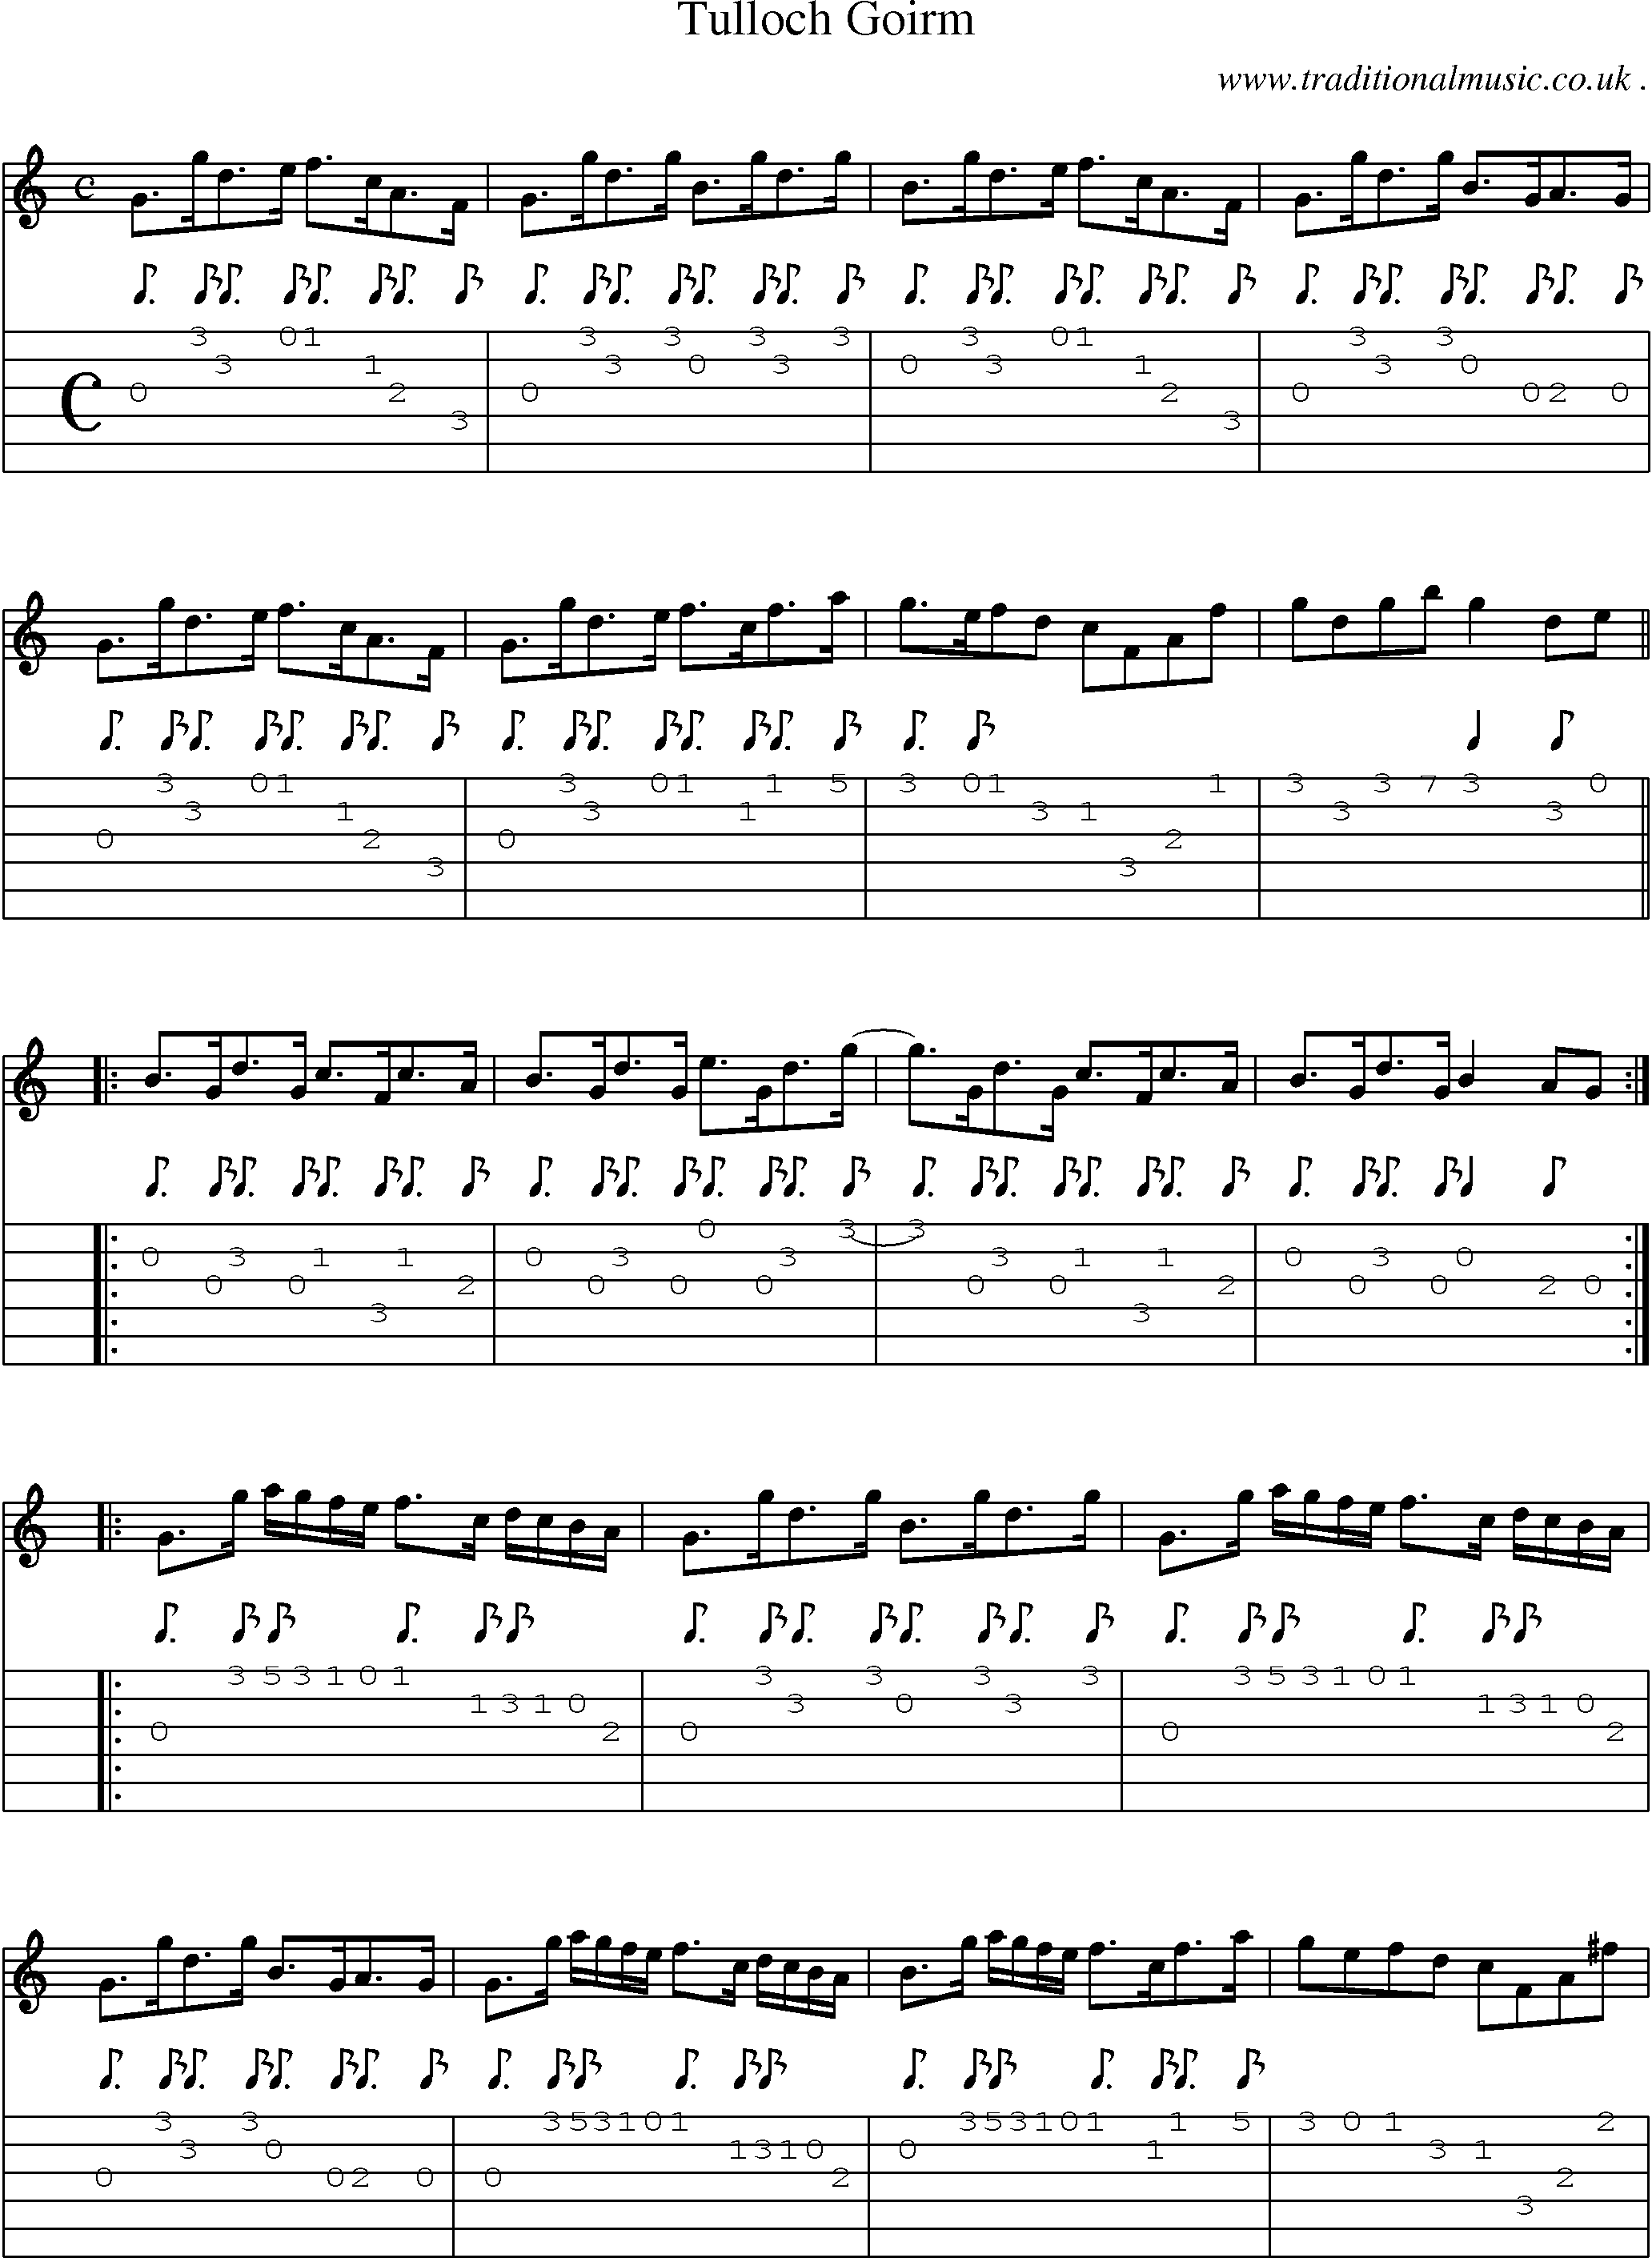 Sheet-music  score, Chords and Guitar Tabs for Tulloch Goirm